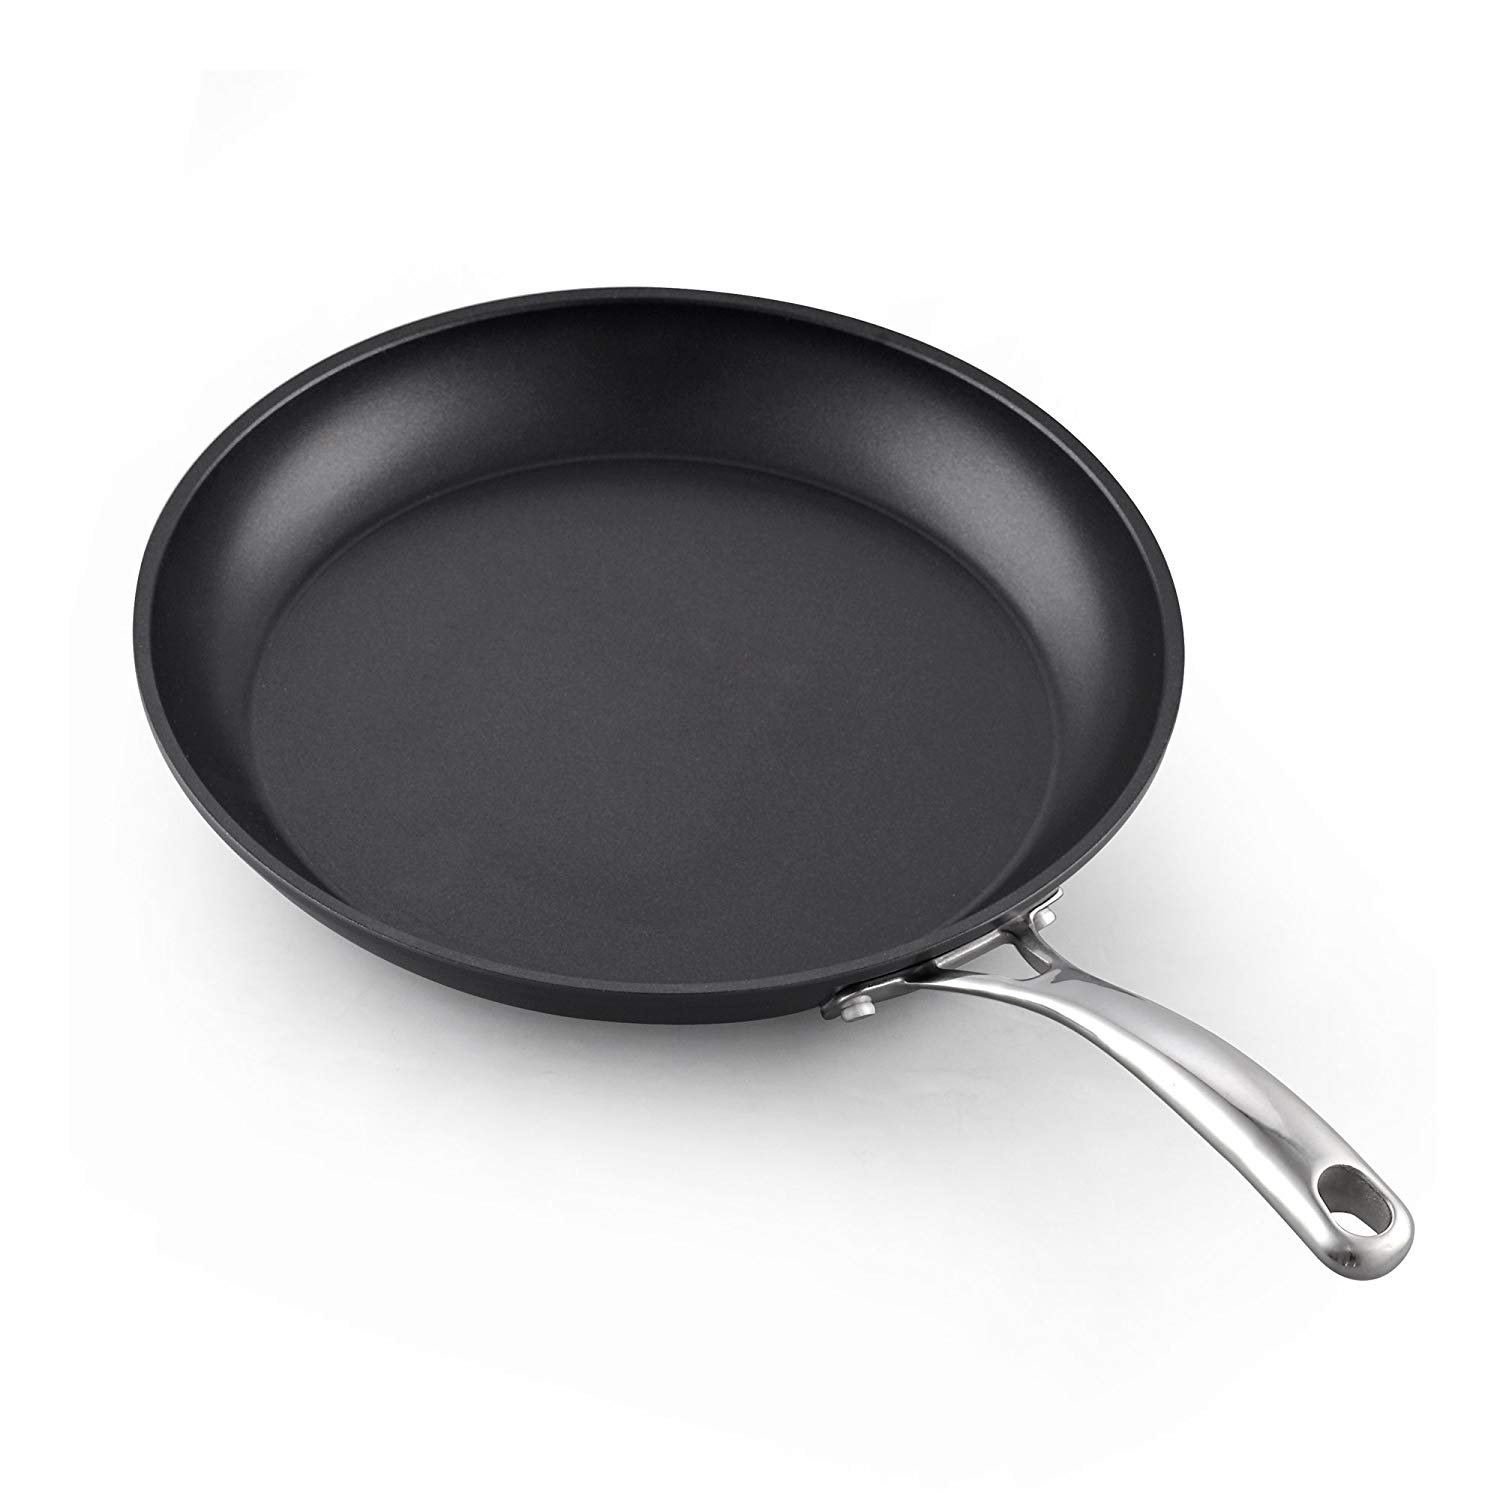 Cooks Standard Anodized Saute Pan, 12-Inch